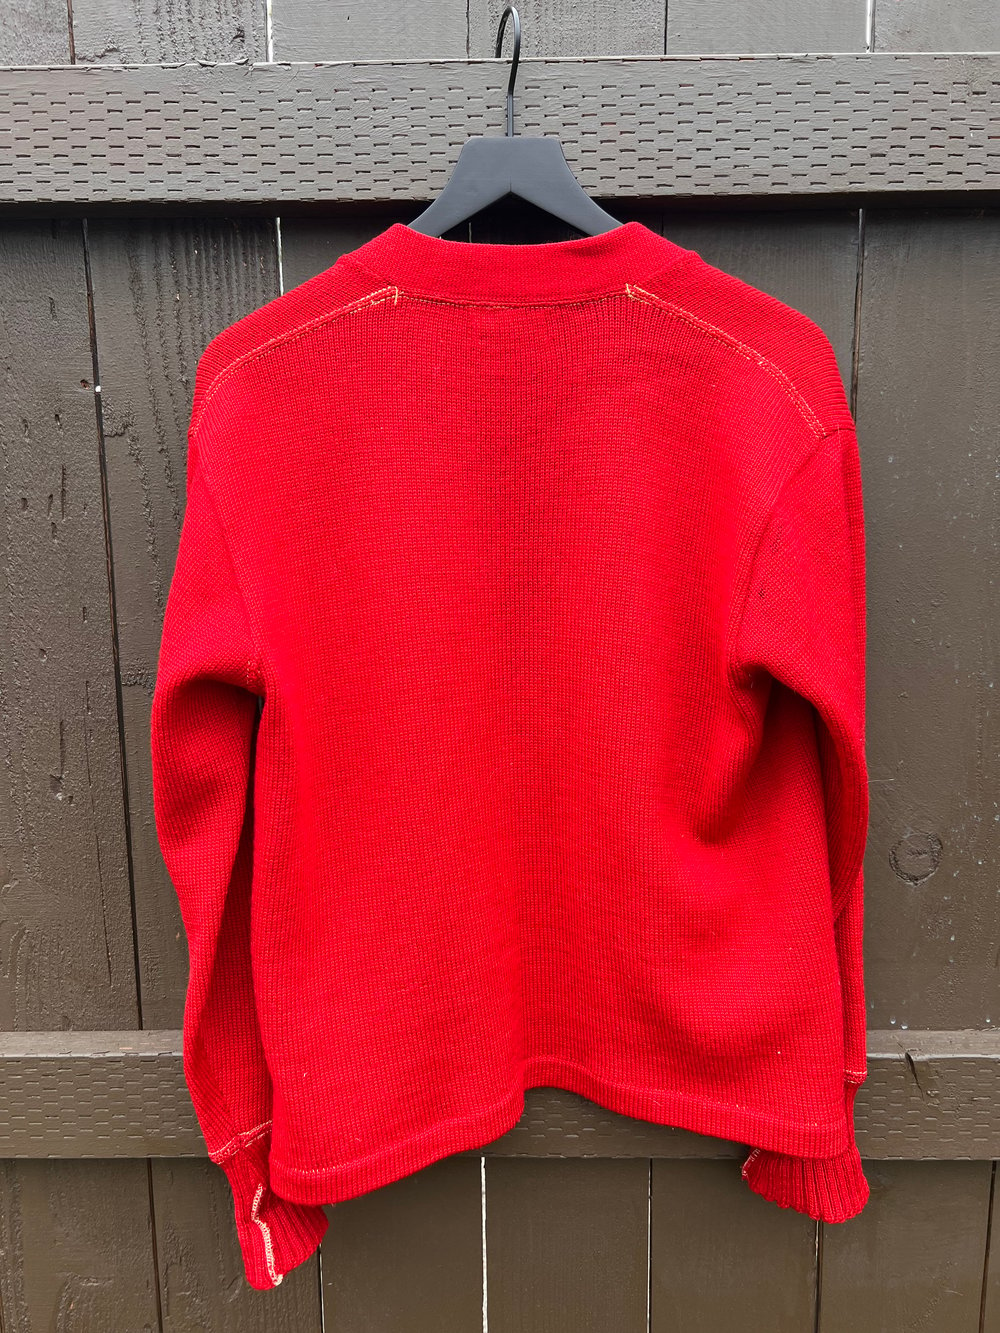 Vintage Puritan “Natch” Red Wool Sweater (S)